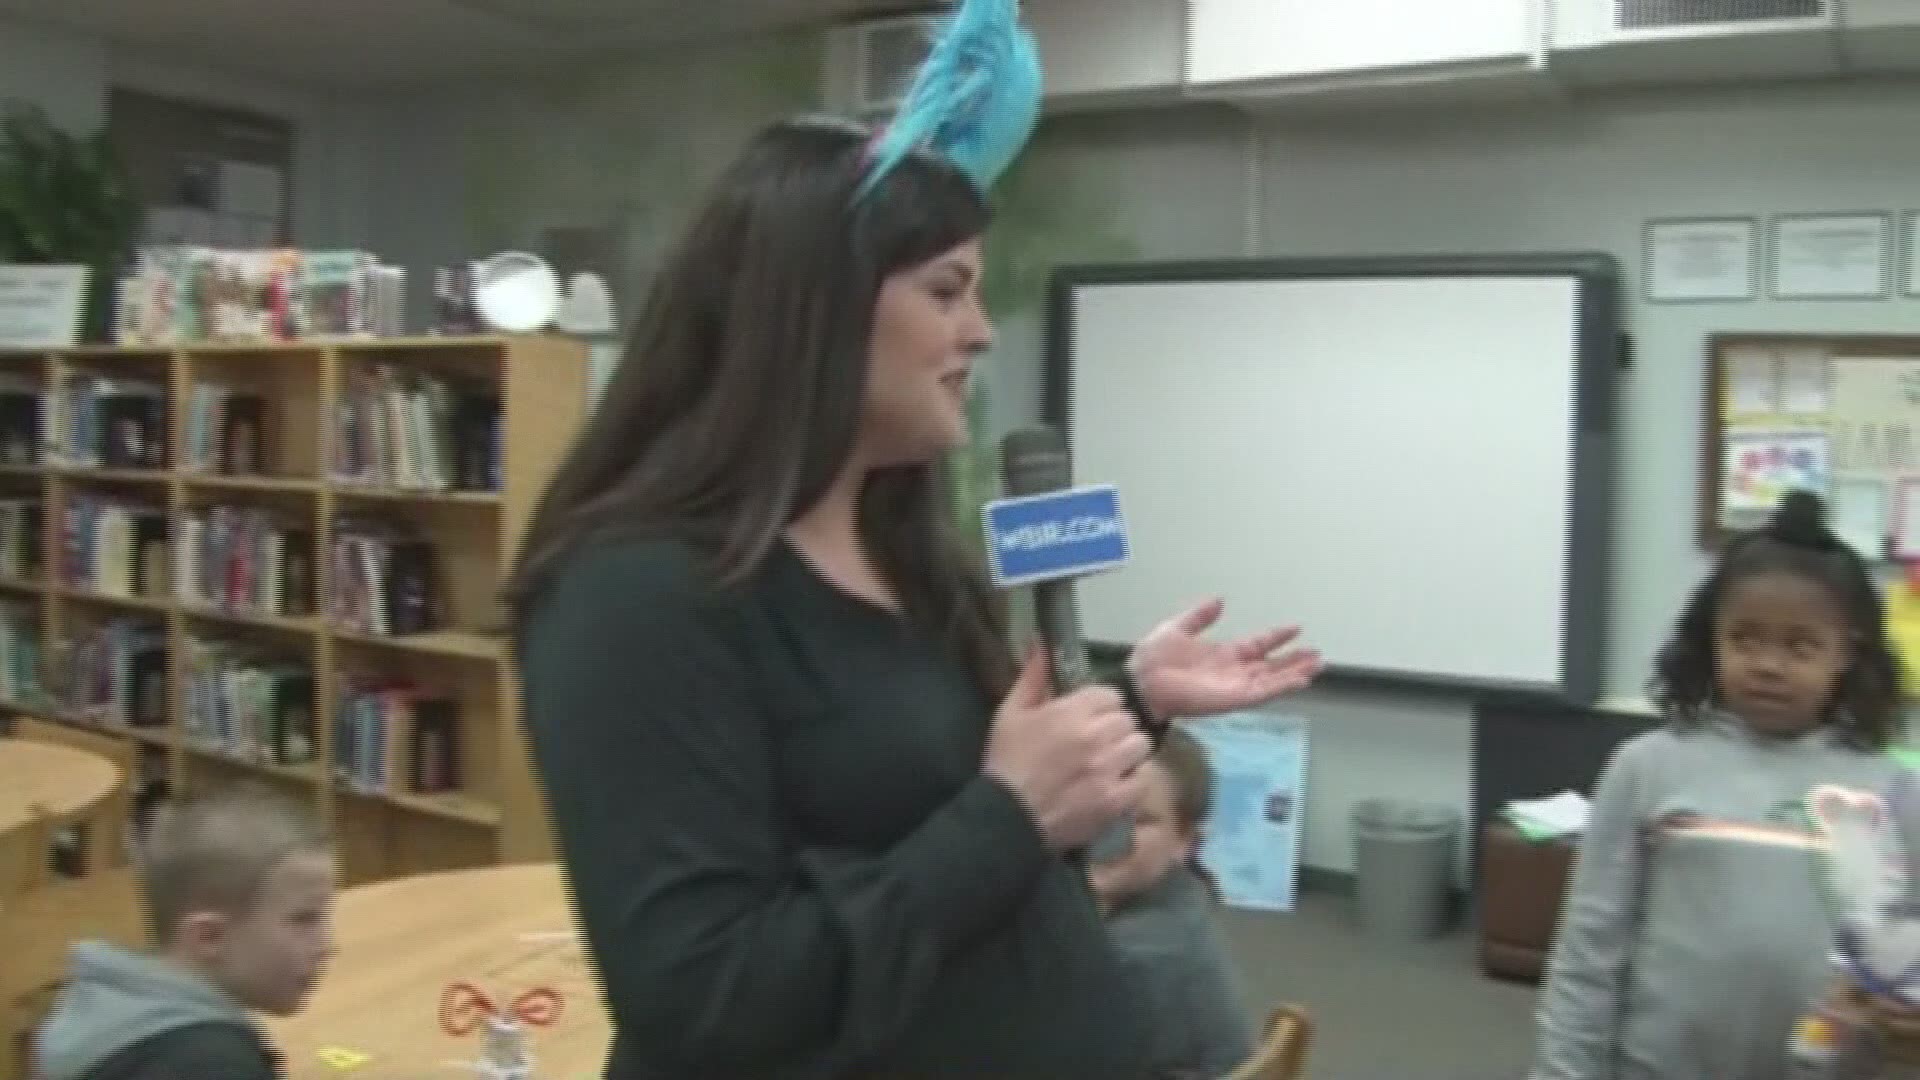 10News anchor Heather Waliga visited Heather Ritta Elementary to find out what makes the school so cool.